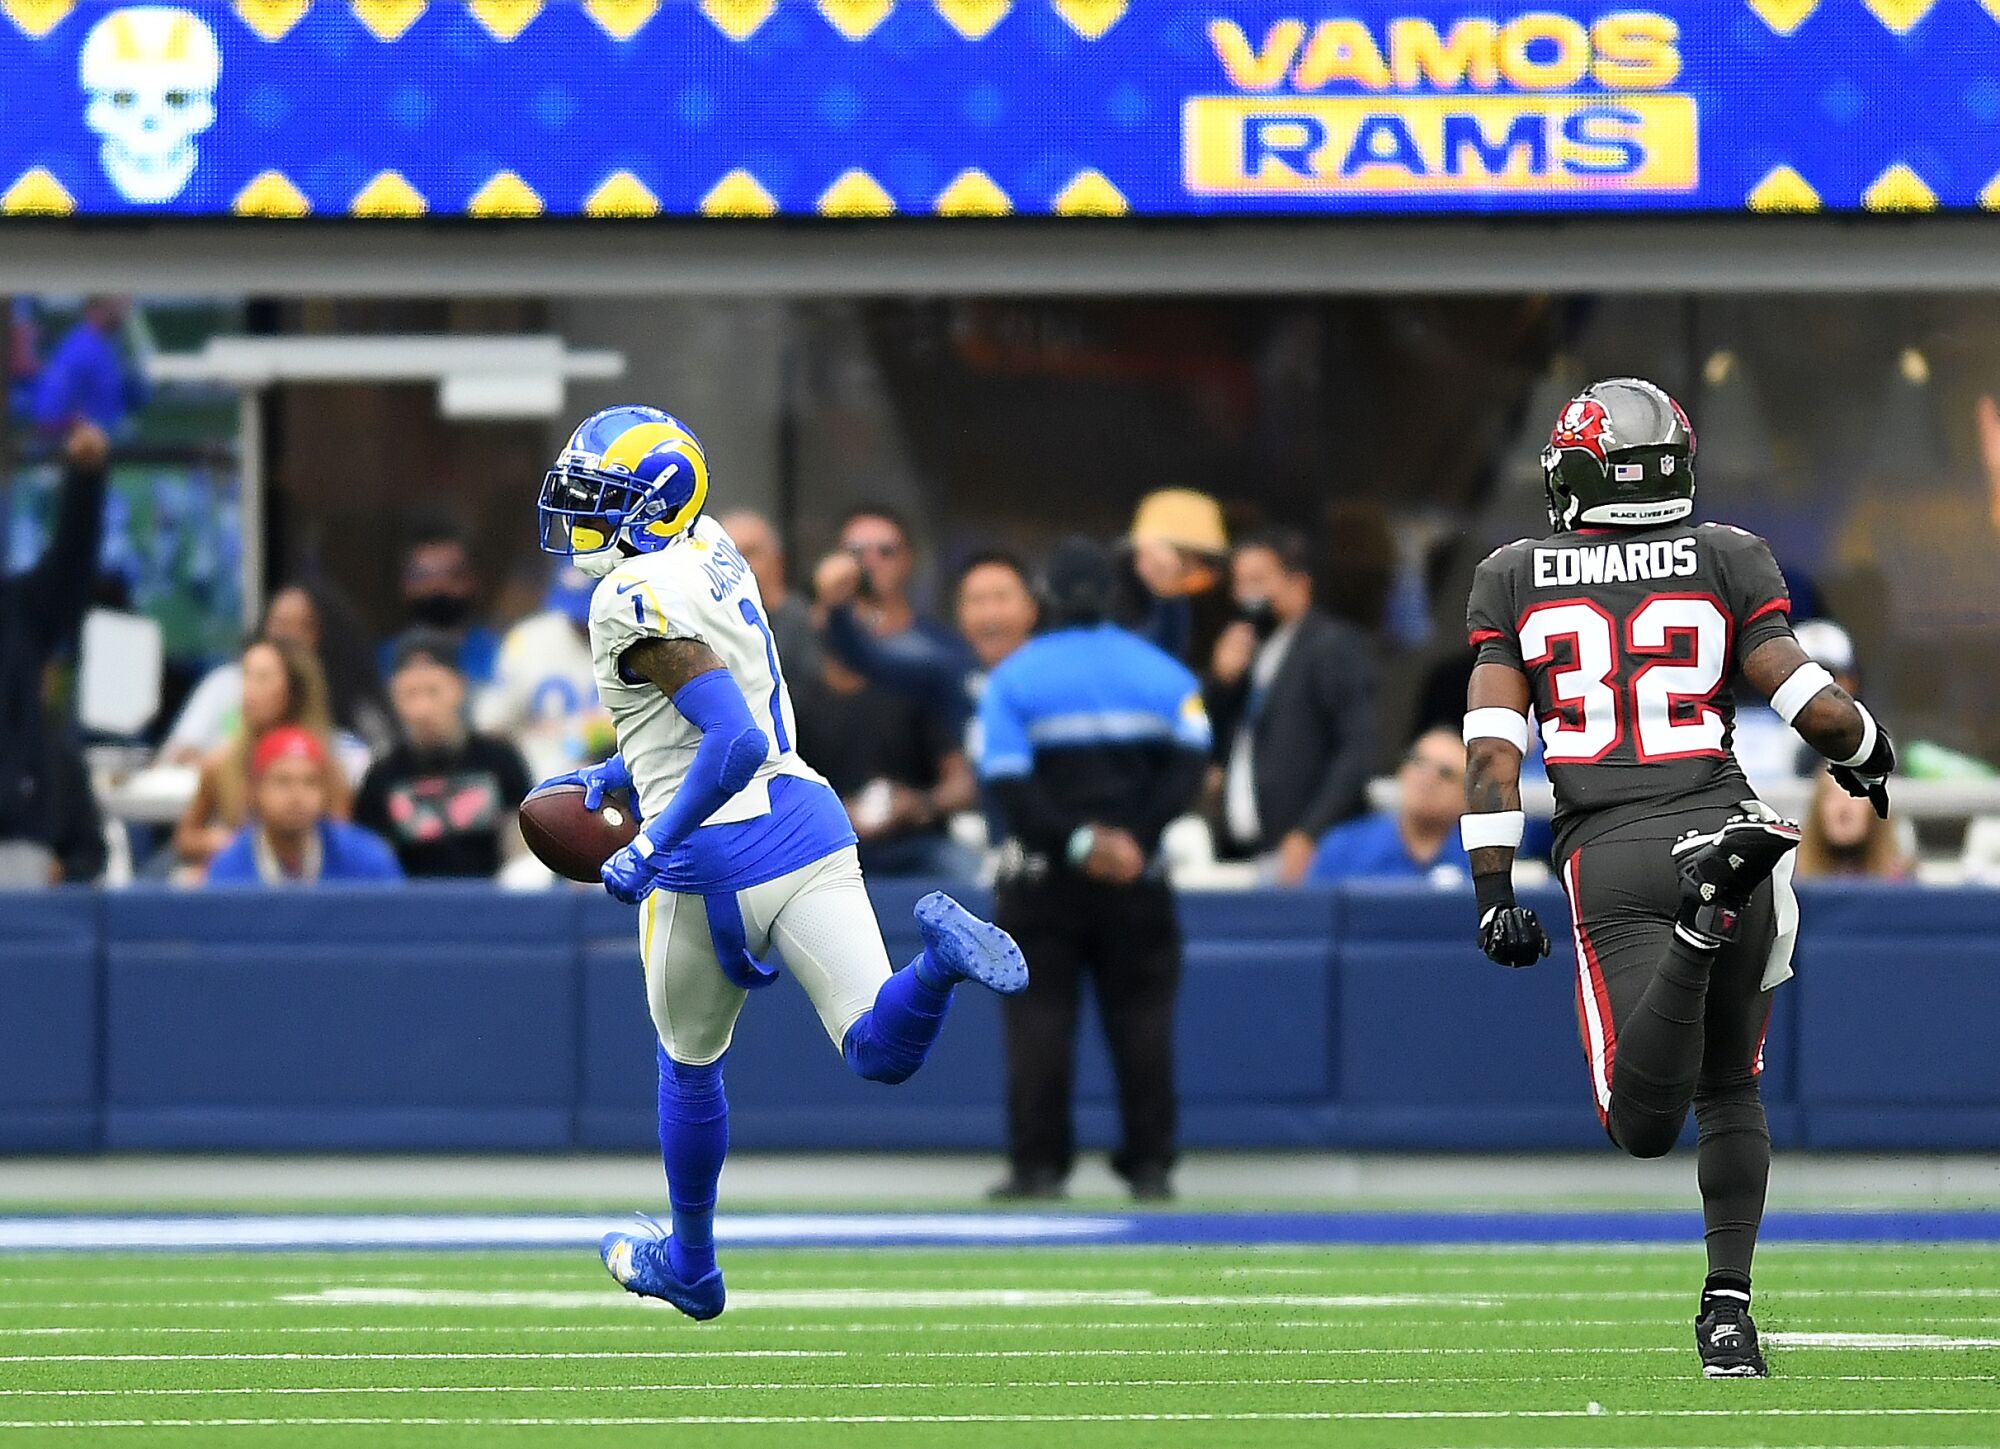 Rams wide receiver DeSean Jackson beats Buccaneers safety Mike Edwards to the end zone.